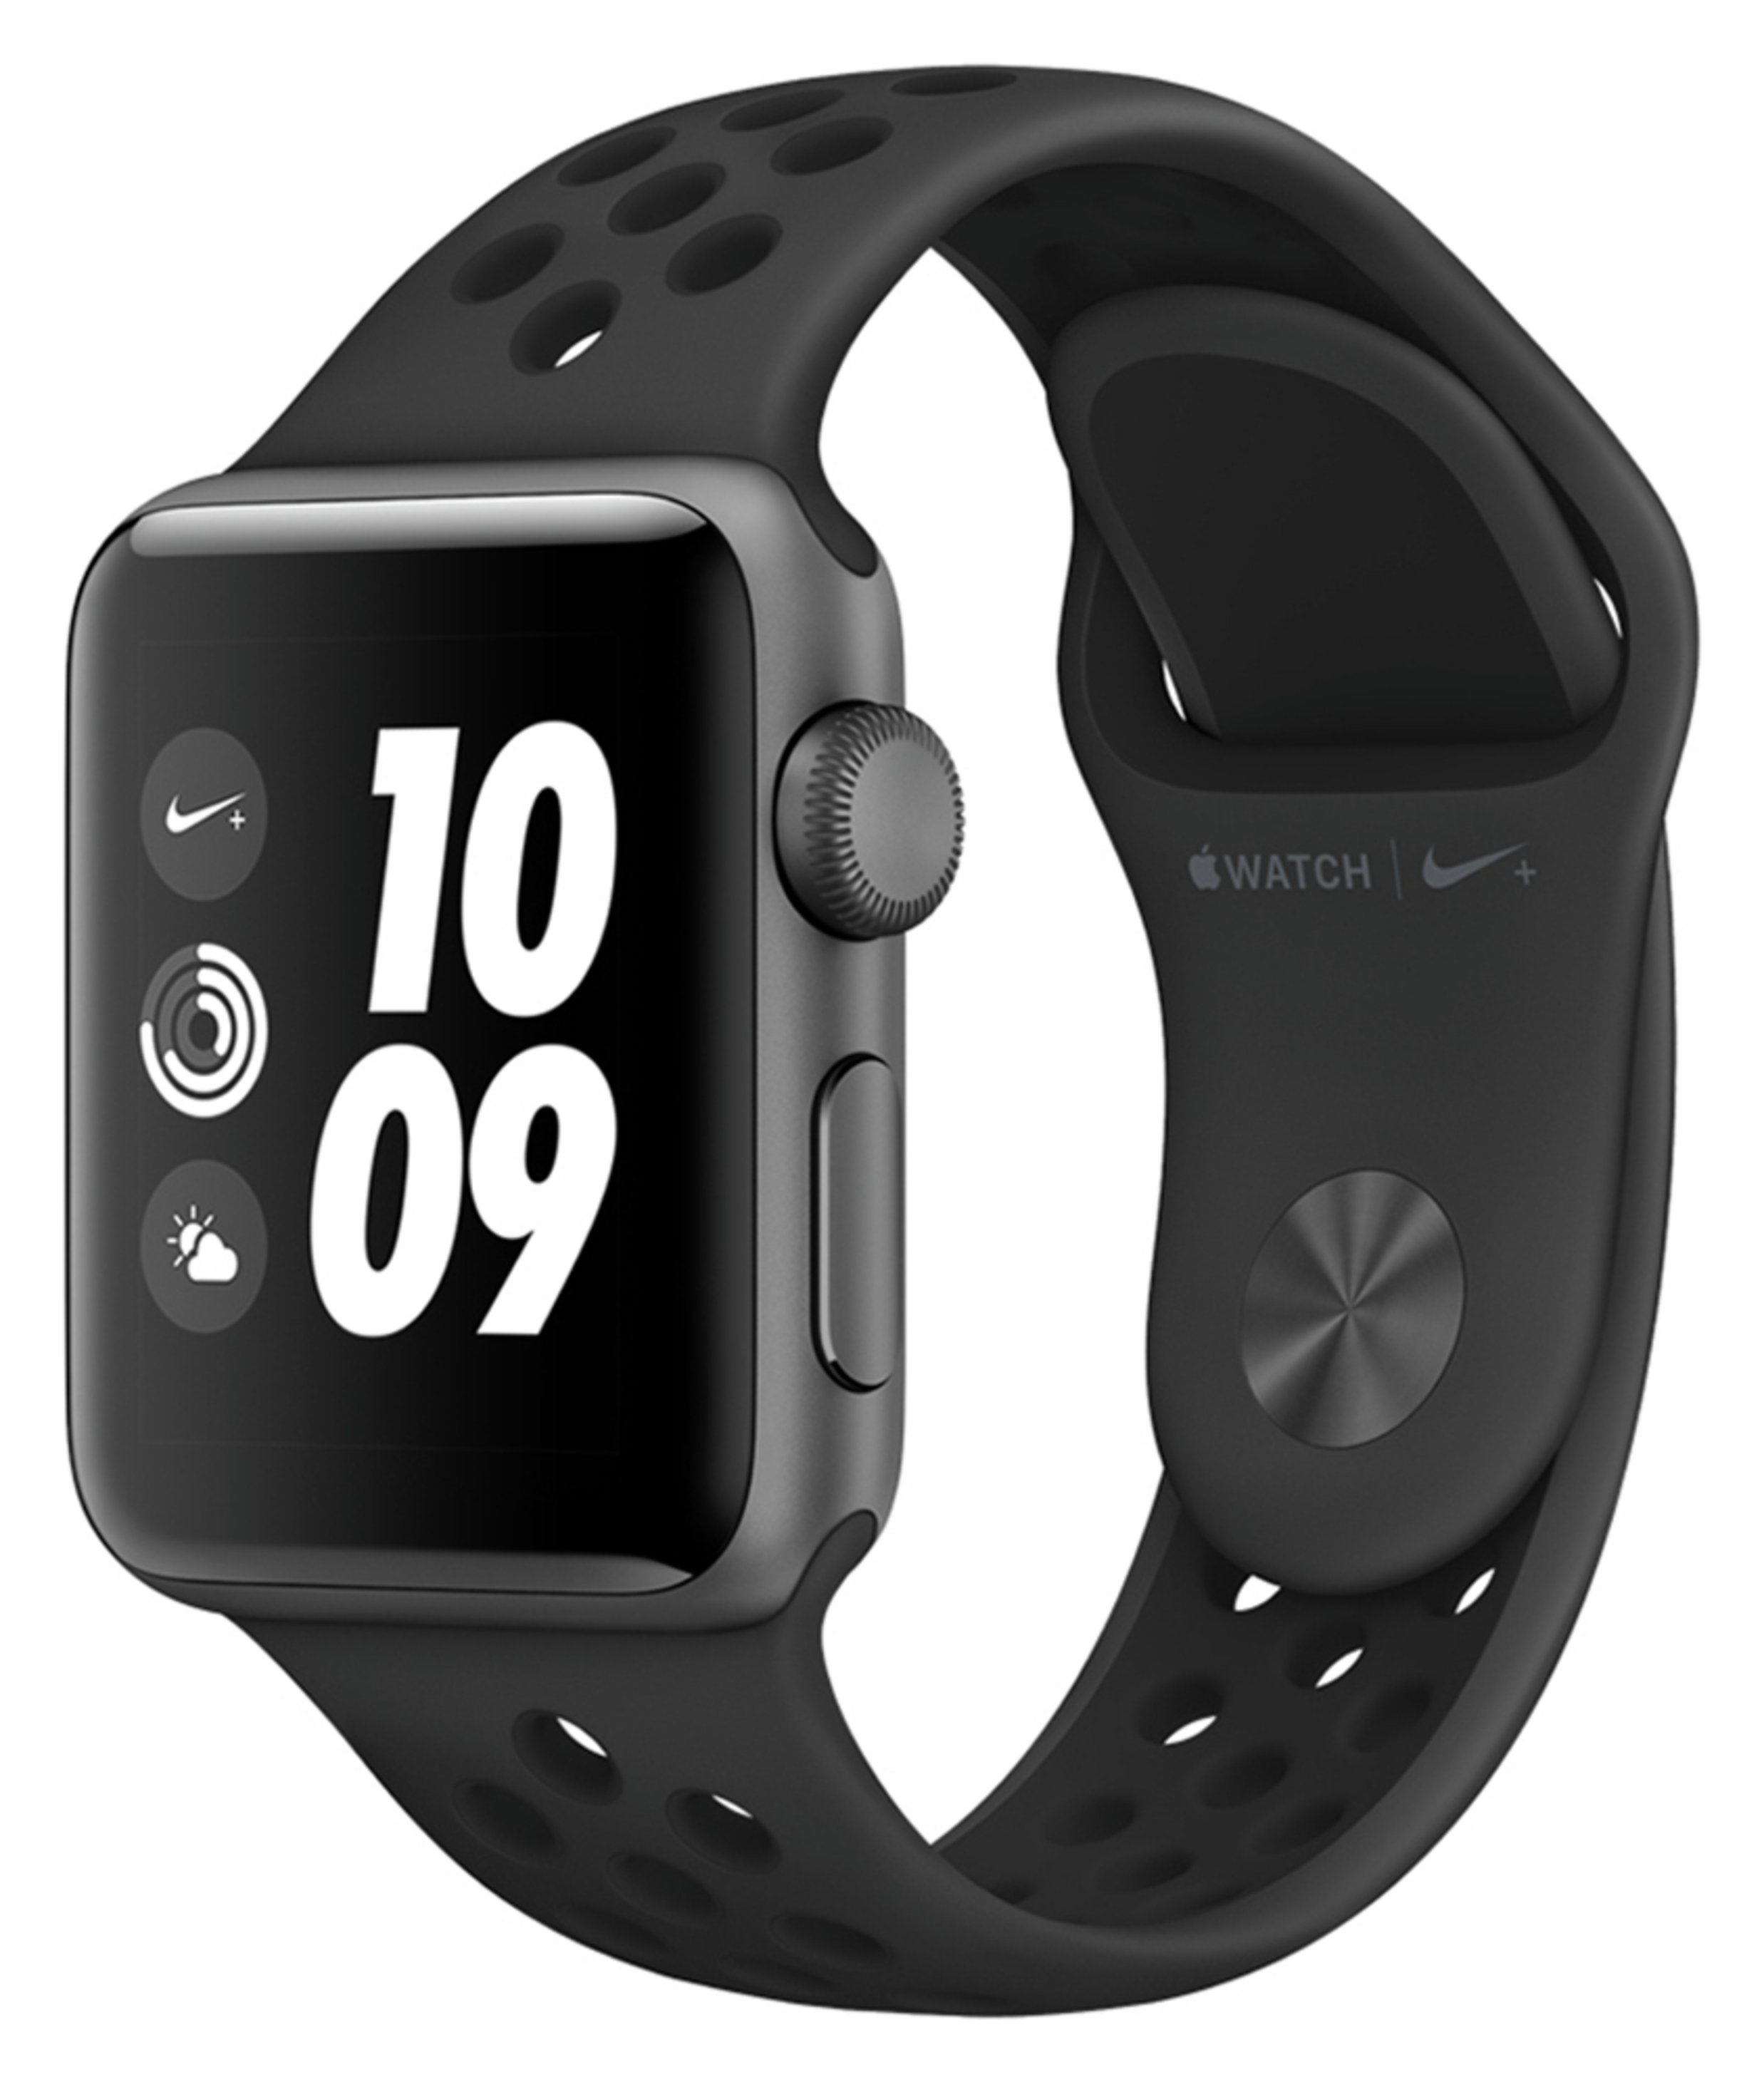 Apple Watch Nike+ GPS 42mm SG Alu Case/Anthracite/Black Band review